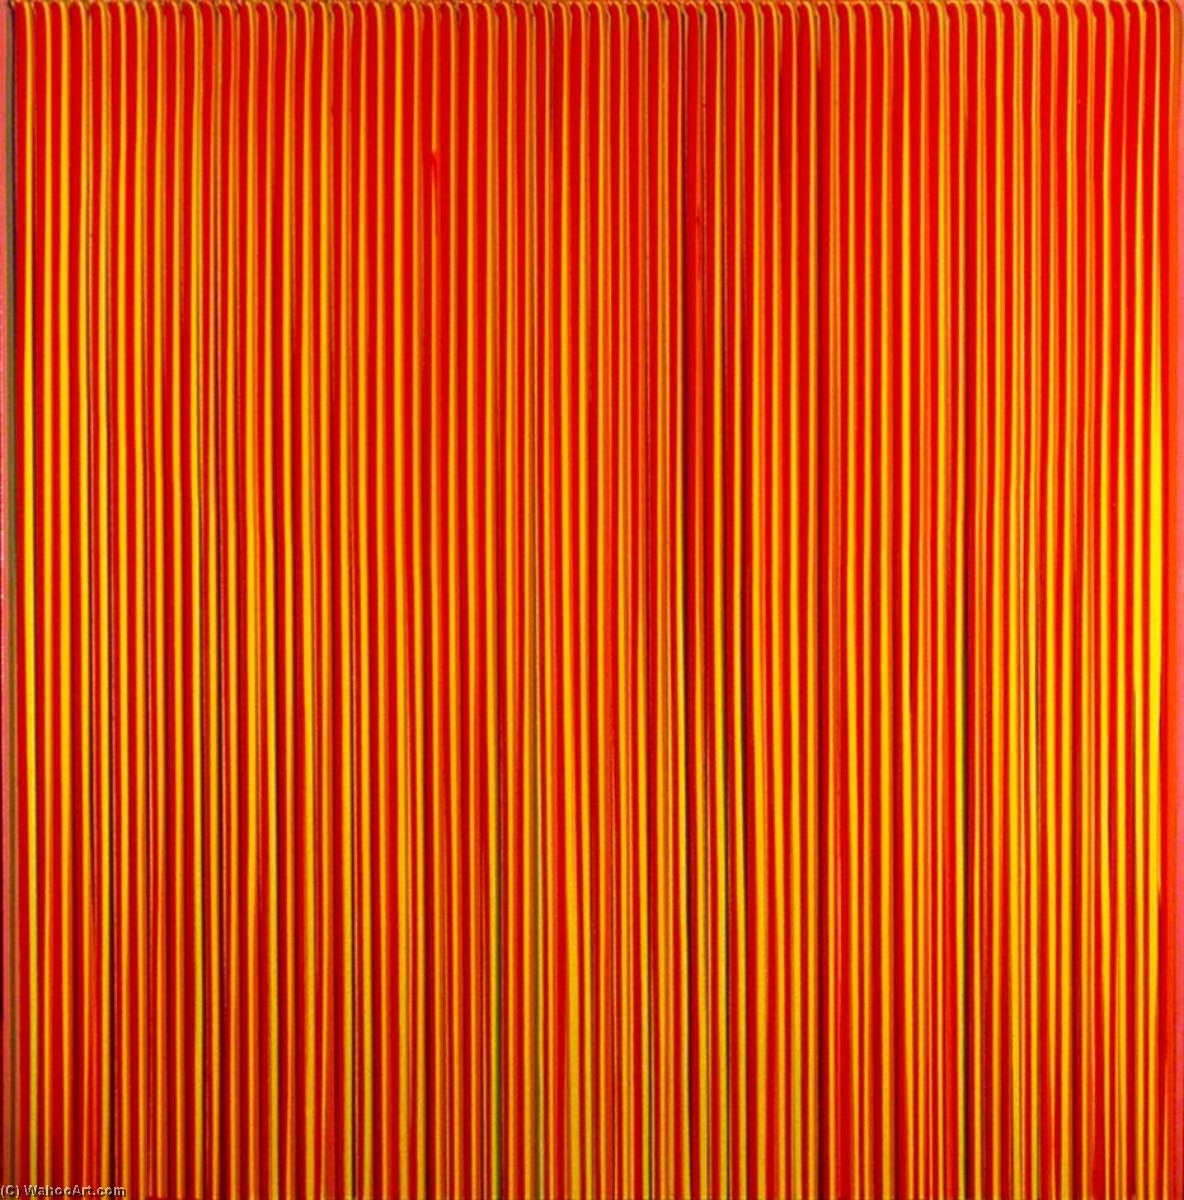 Poured Lines, Light Red, Green, Blue, Yellow, Orange, Yellow, Red, 1995 by Ian Davenport Ian Davenport | ArtsDot.com